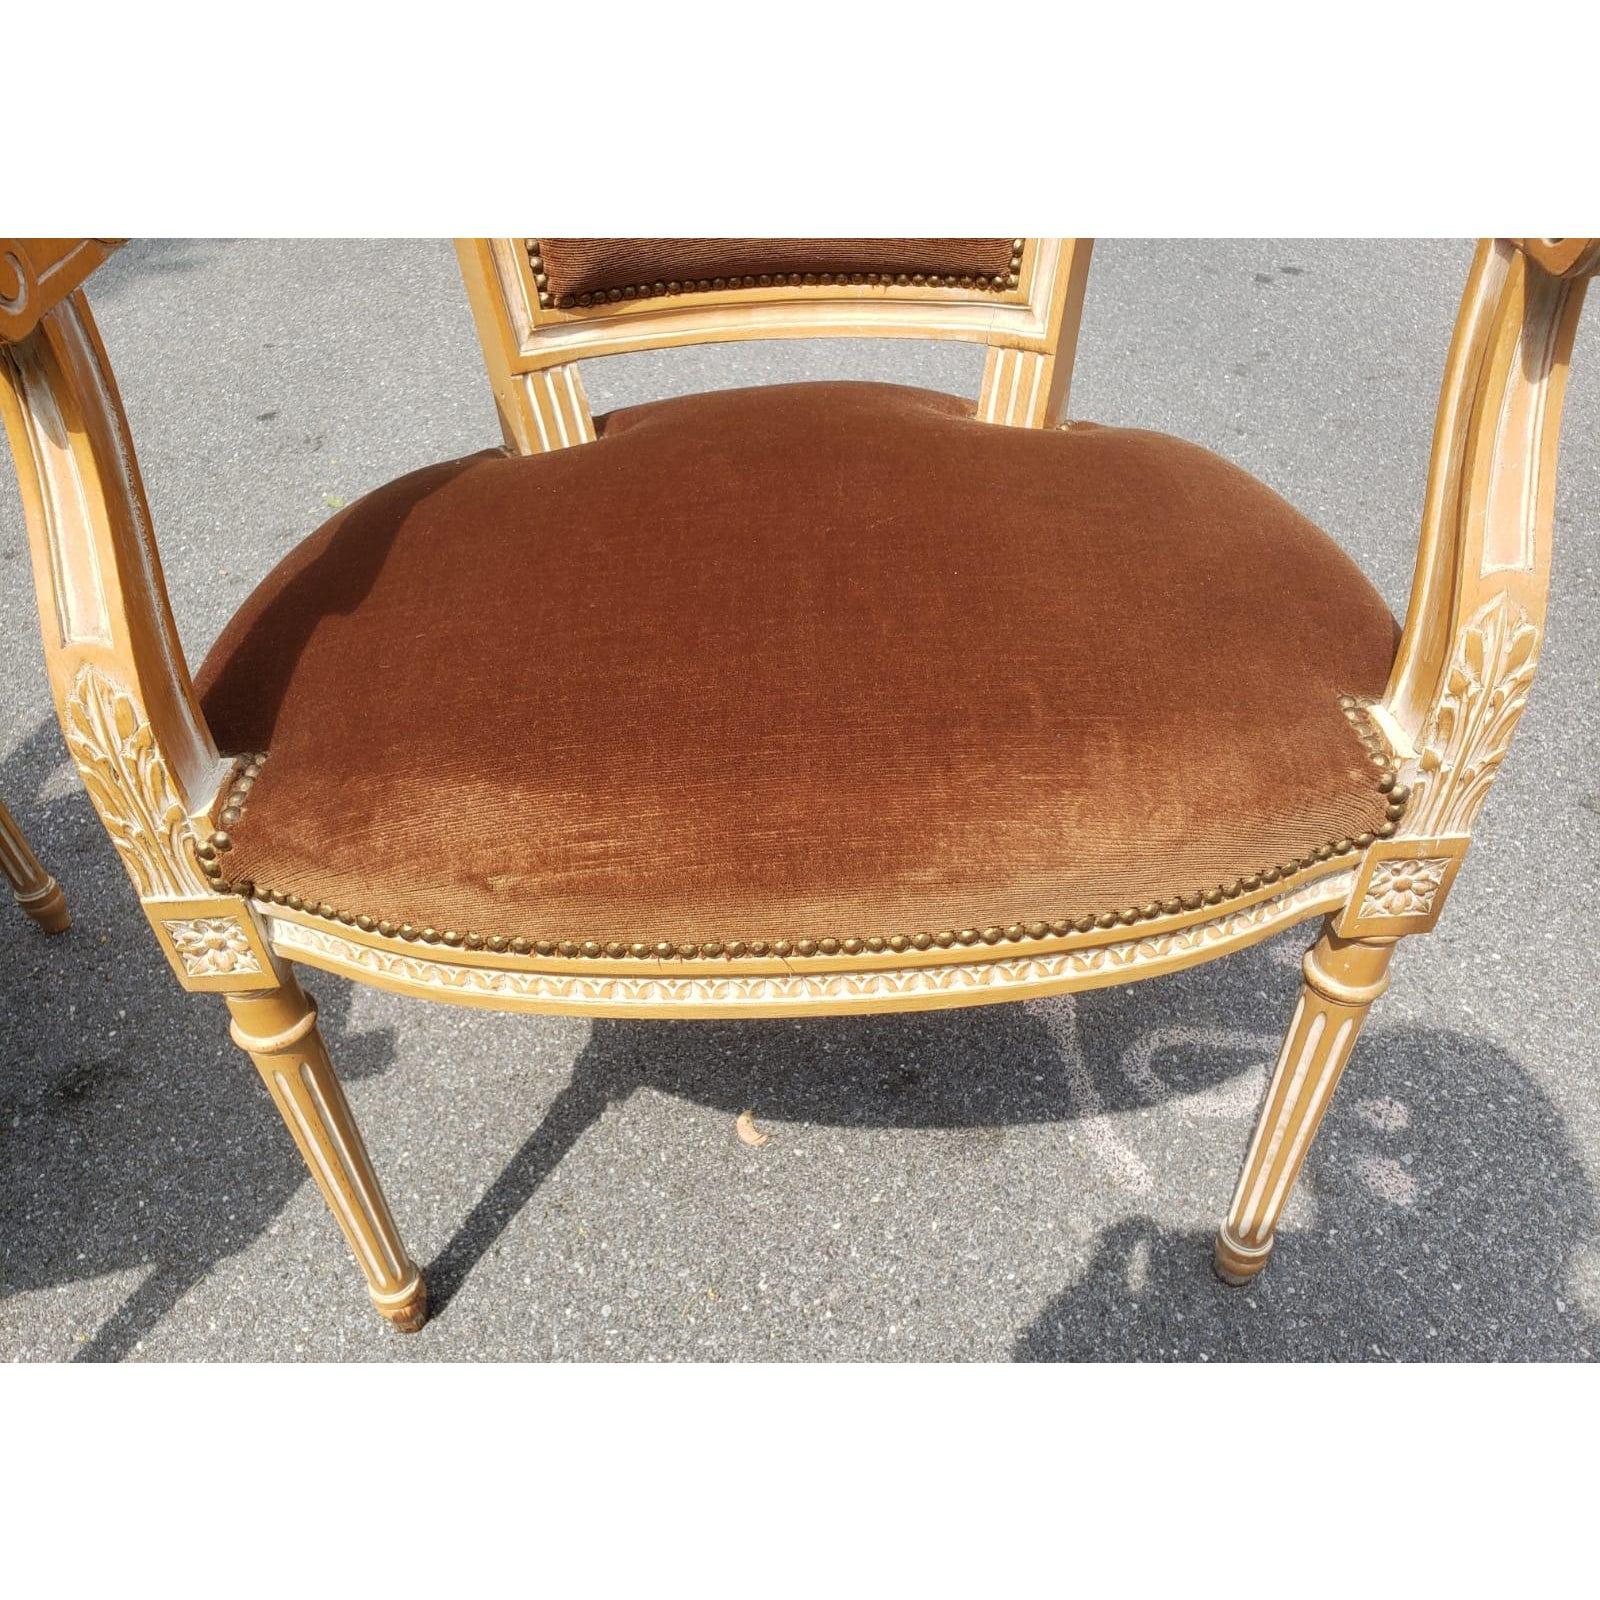 1930s Vintage Gustavian Style Swedish Empire Upholstered Armchairs, a Pair For Sale 1